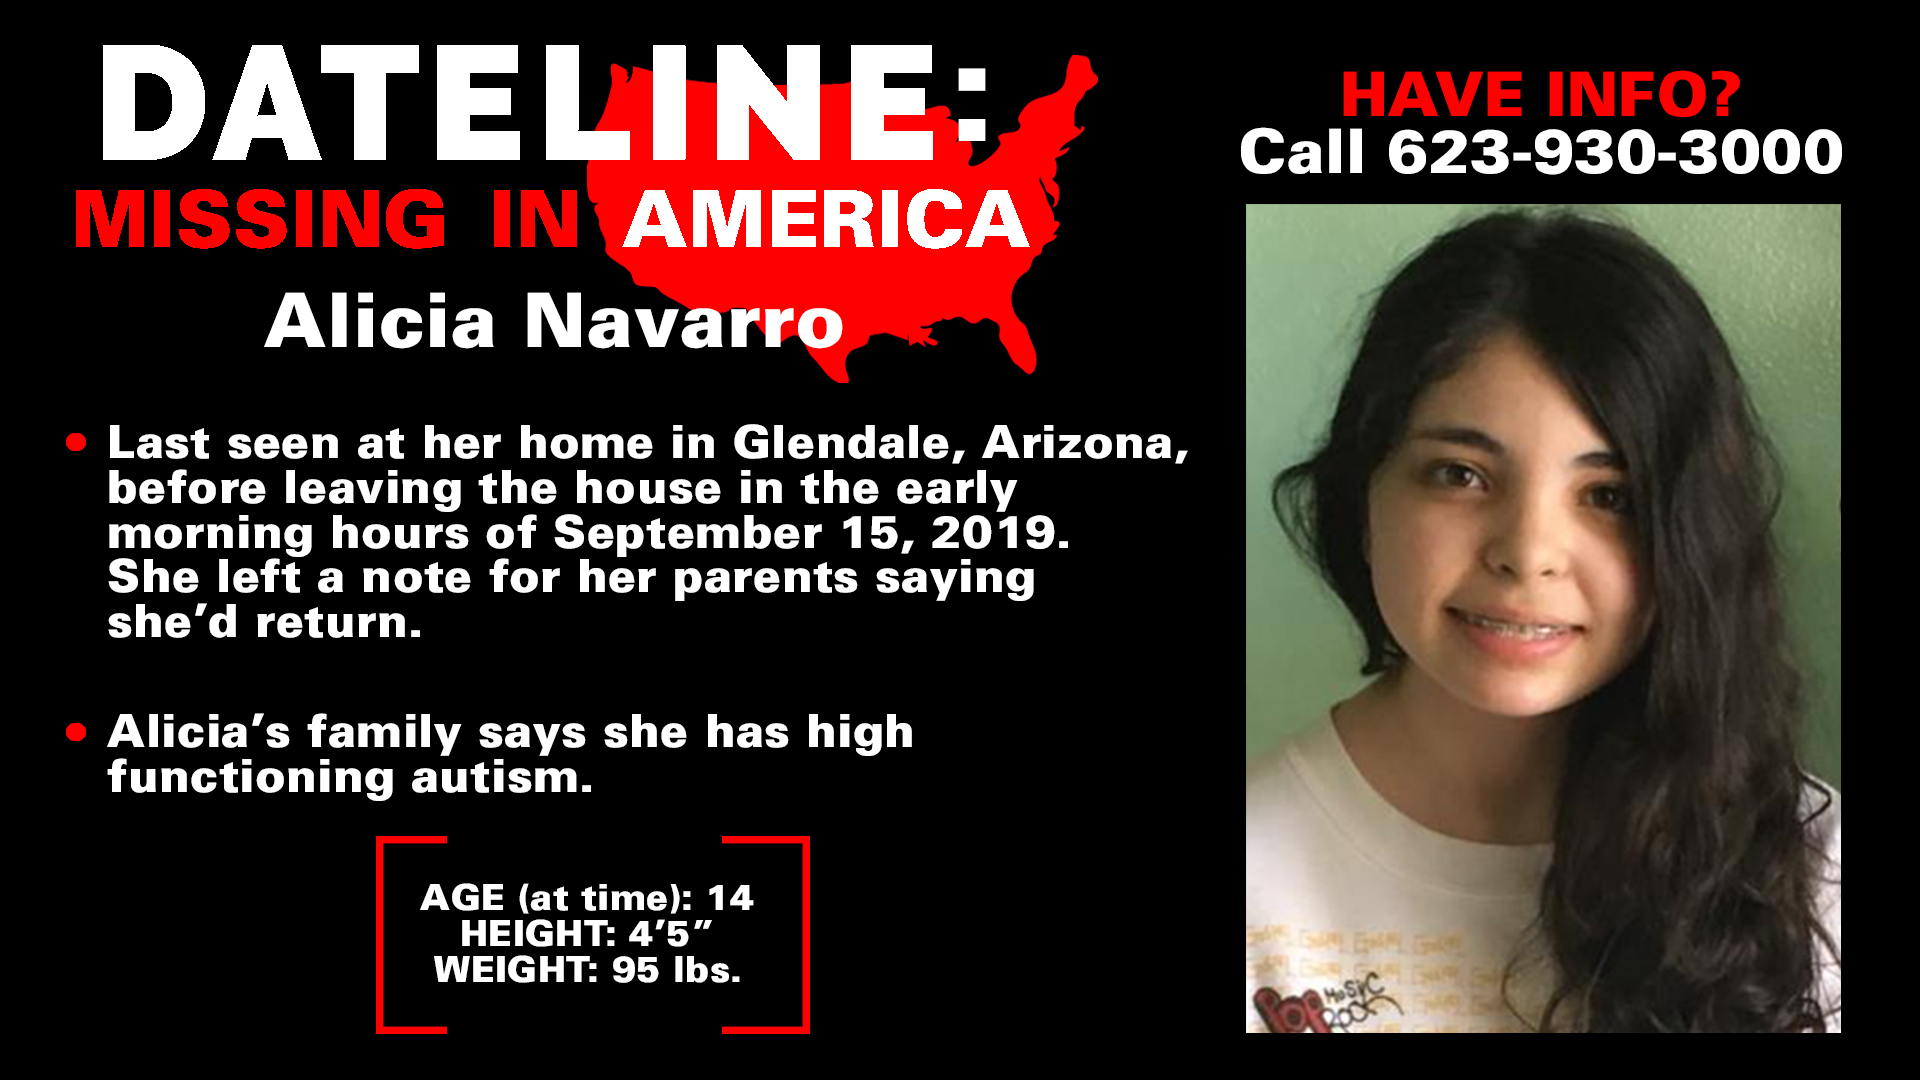 Disturbing unsolved mysteries - alicia navarro - Dateline Missing In America Alicia Navarro Last seen at her home in Glendale, Arizona, before leaving the house in the early morning hours of . She left a note for her parents saying she'd return. Alicia's 